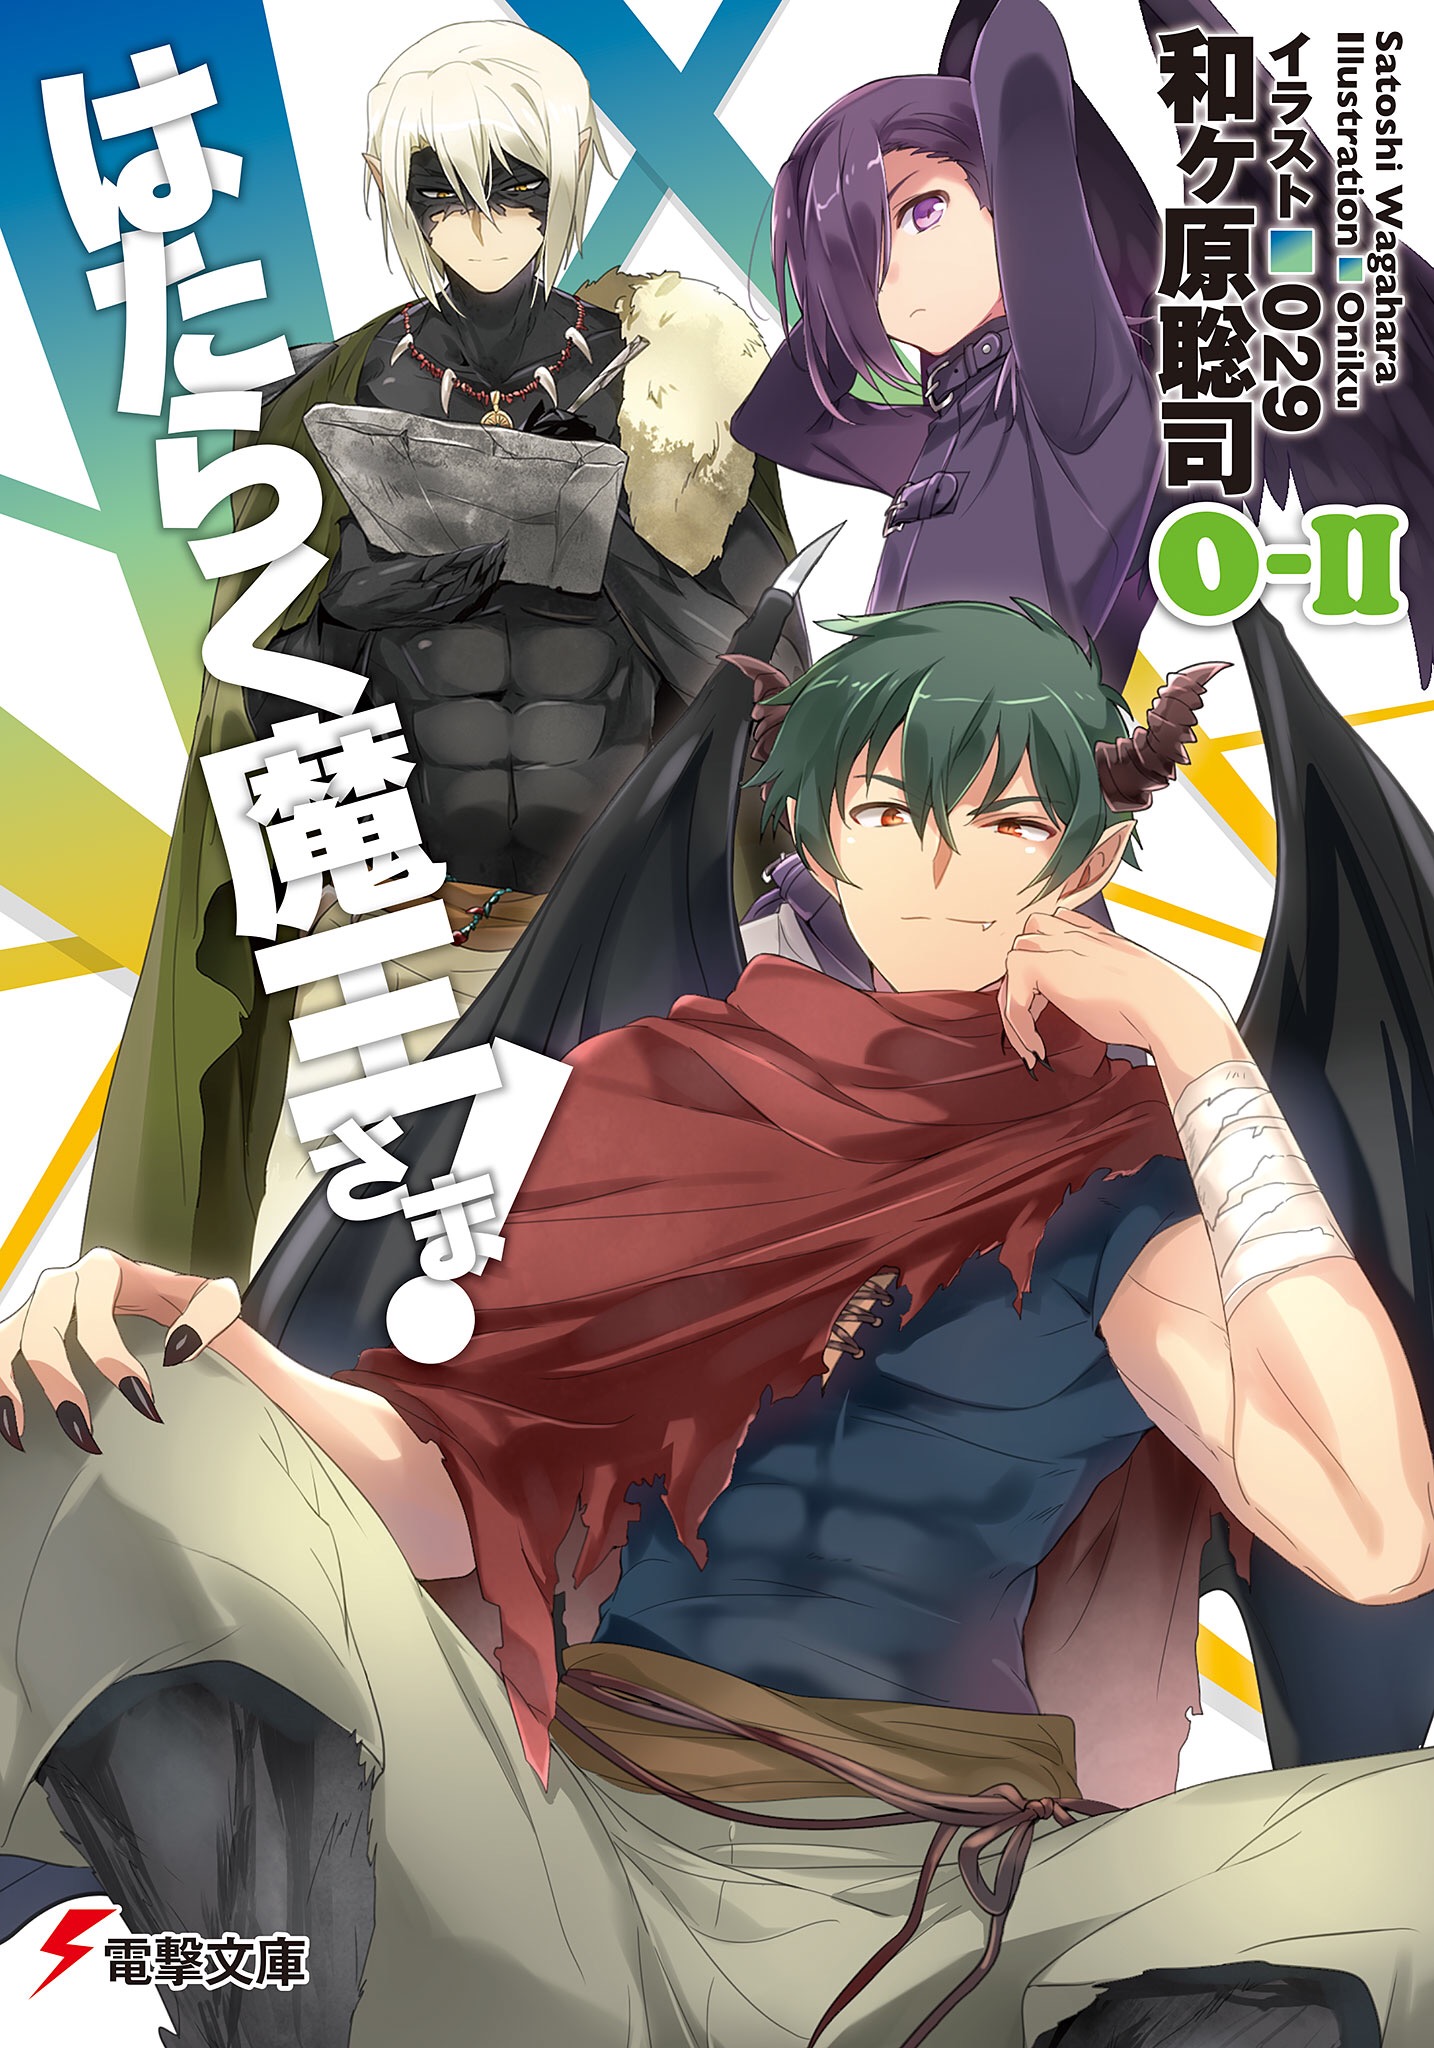 Anime Corner - JUST IN: With the Domekano author backlash still in recent  memory, now the author of Hataraku Maou-sama! is on the receiving end of  negative reactions for the way he